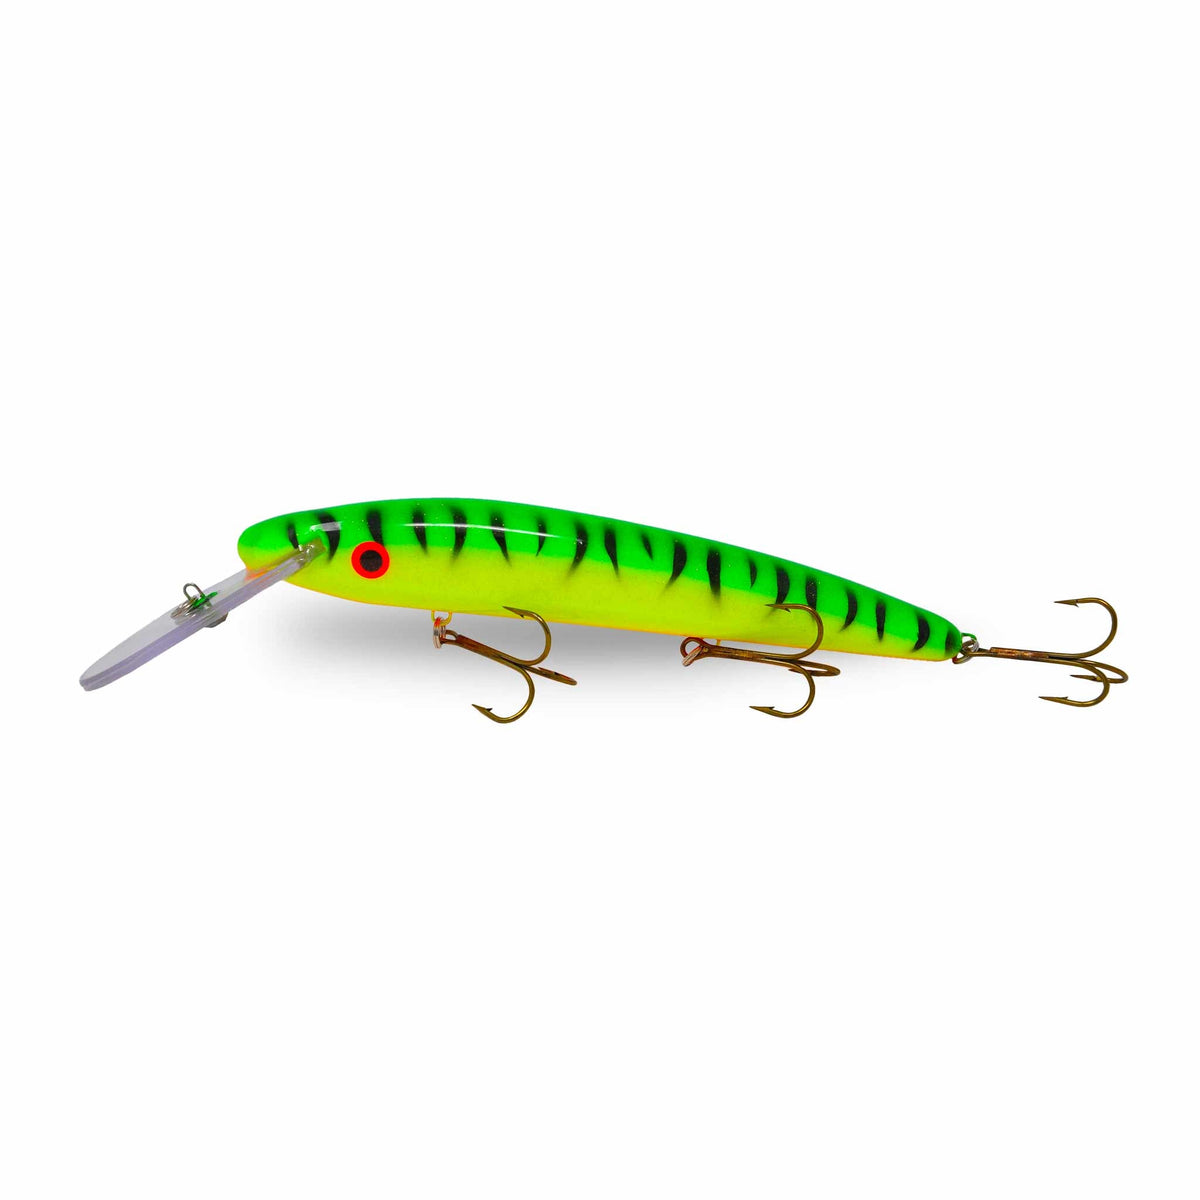 View of Crankbaits Slammer 10" Deep Minnow Crankbait Fire Tiger available at EZOKO Pike and Musky Shop